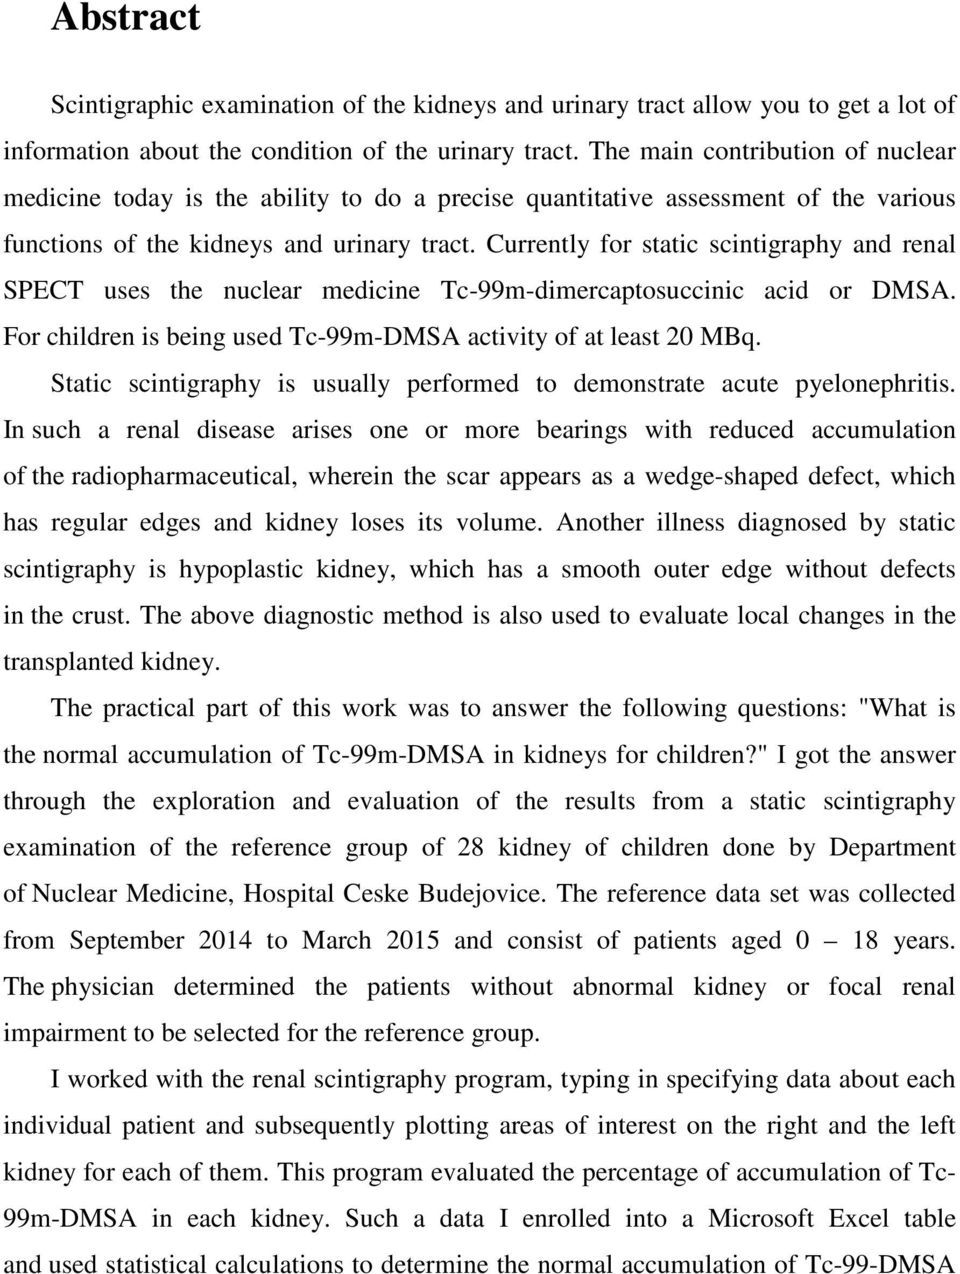 Currently for static scintigraphy and renal SPECT uses the nuclear medicine Tc-99m-dimercaptosuccinic acid or DMSA. For children is being used Tc-99m-DMSA activity of at least 20 MBq.